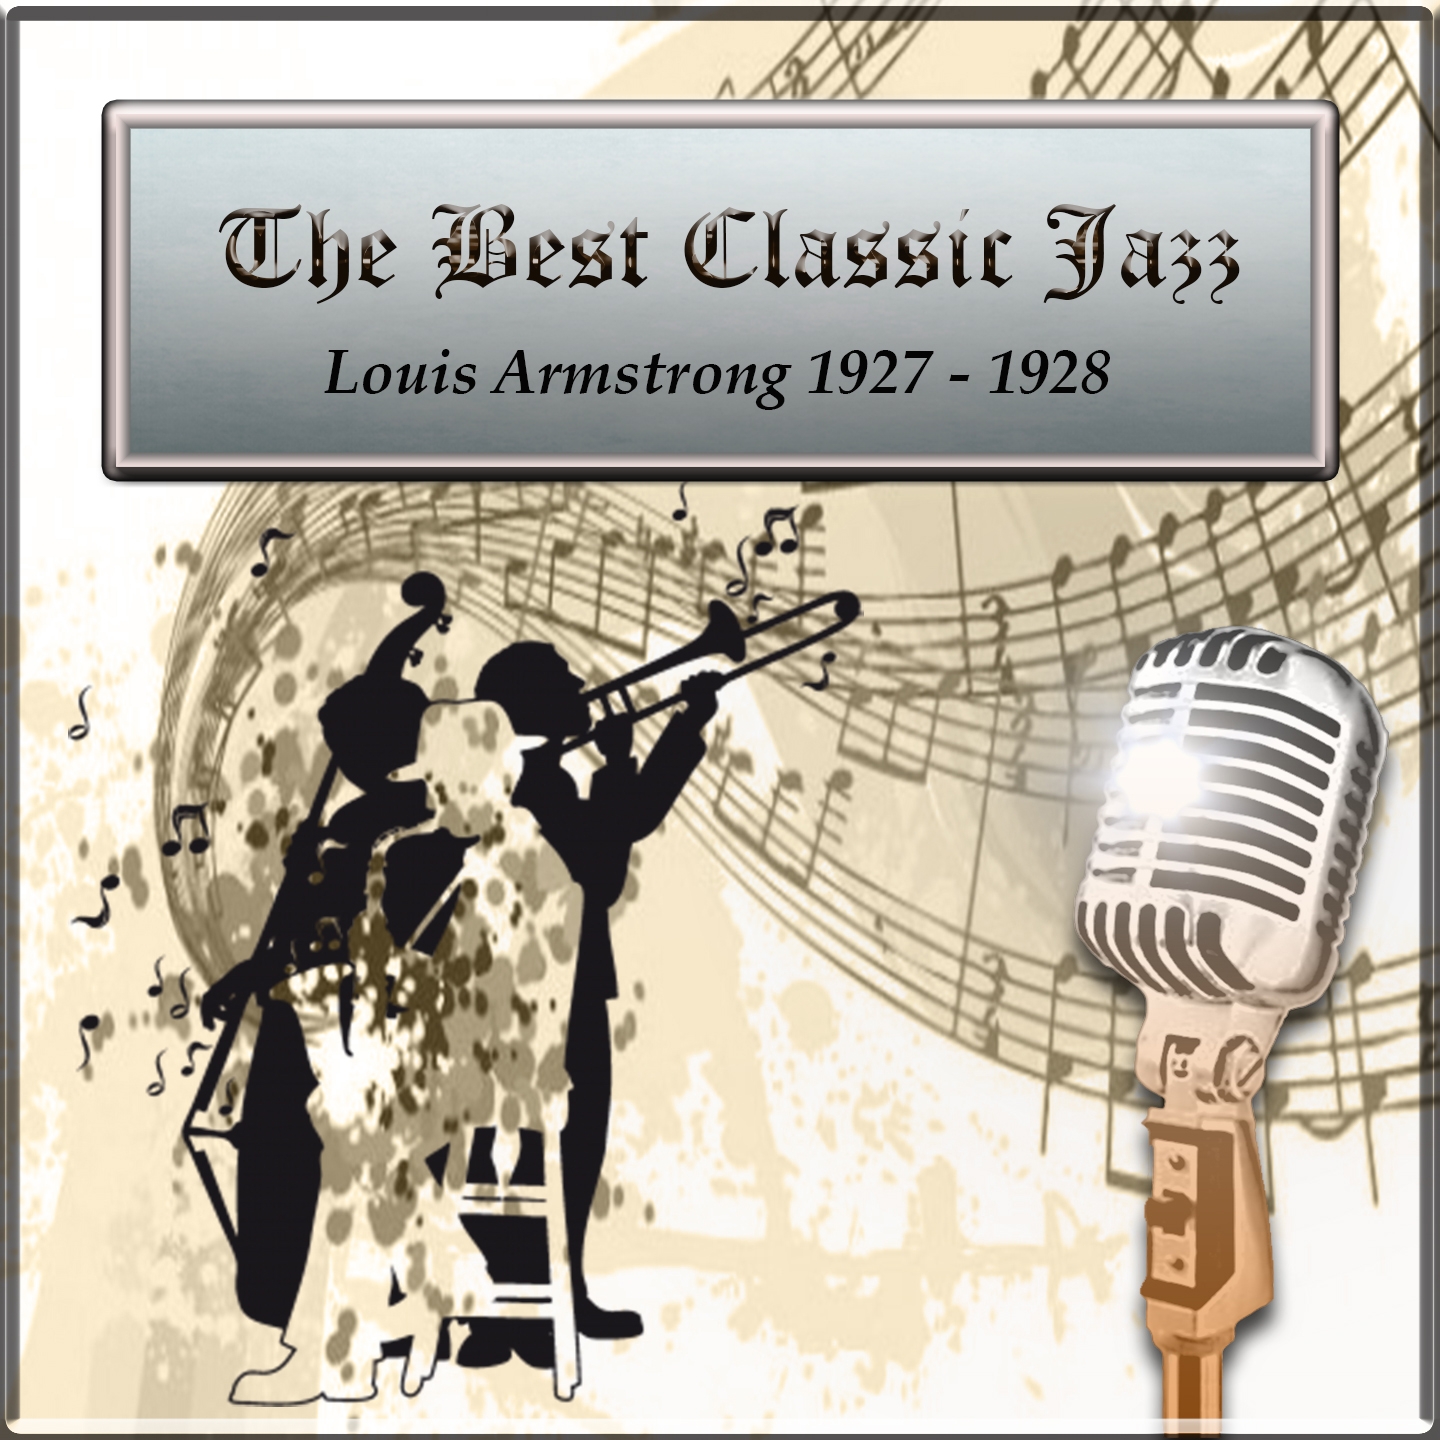 The Best Classic Jazz, Louis Armstrong 1927 - 1928